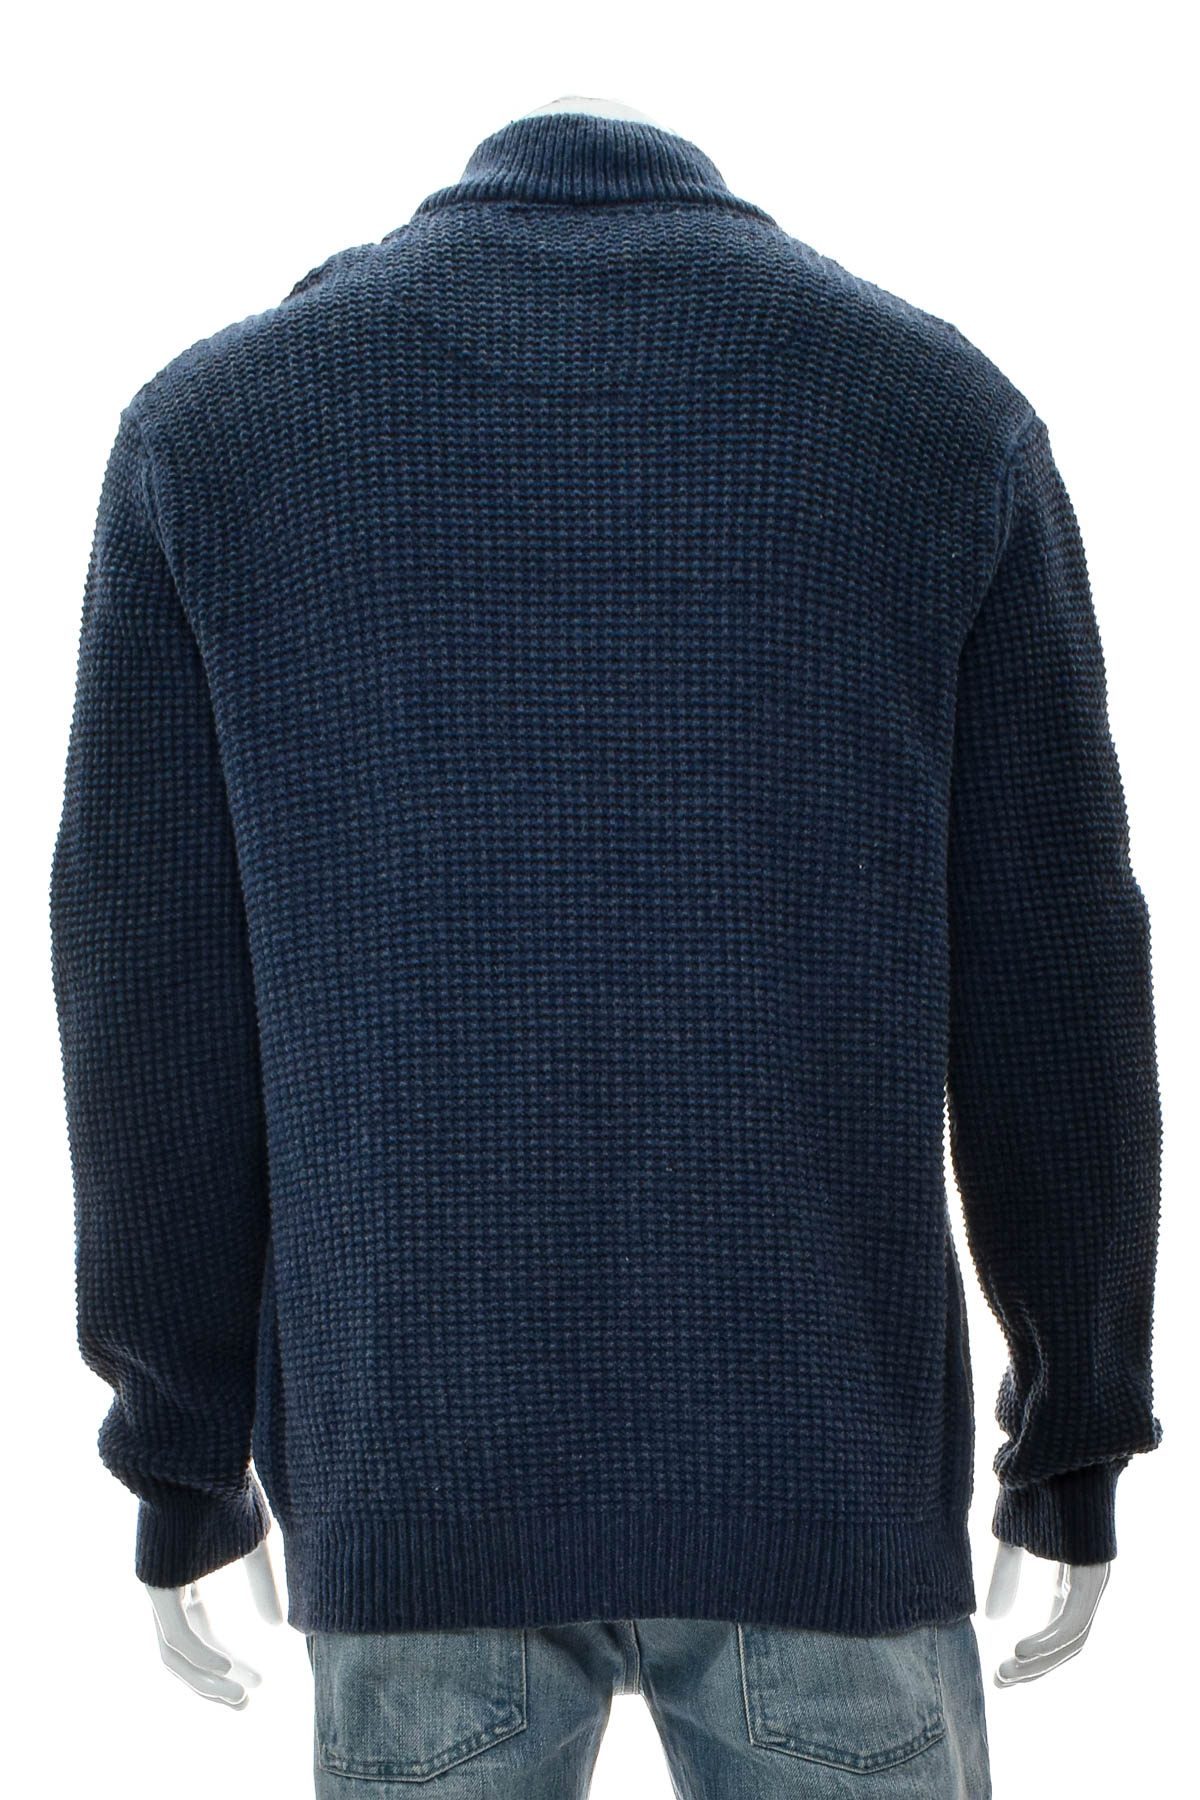 Men's sweater - Just Jeans - 1